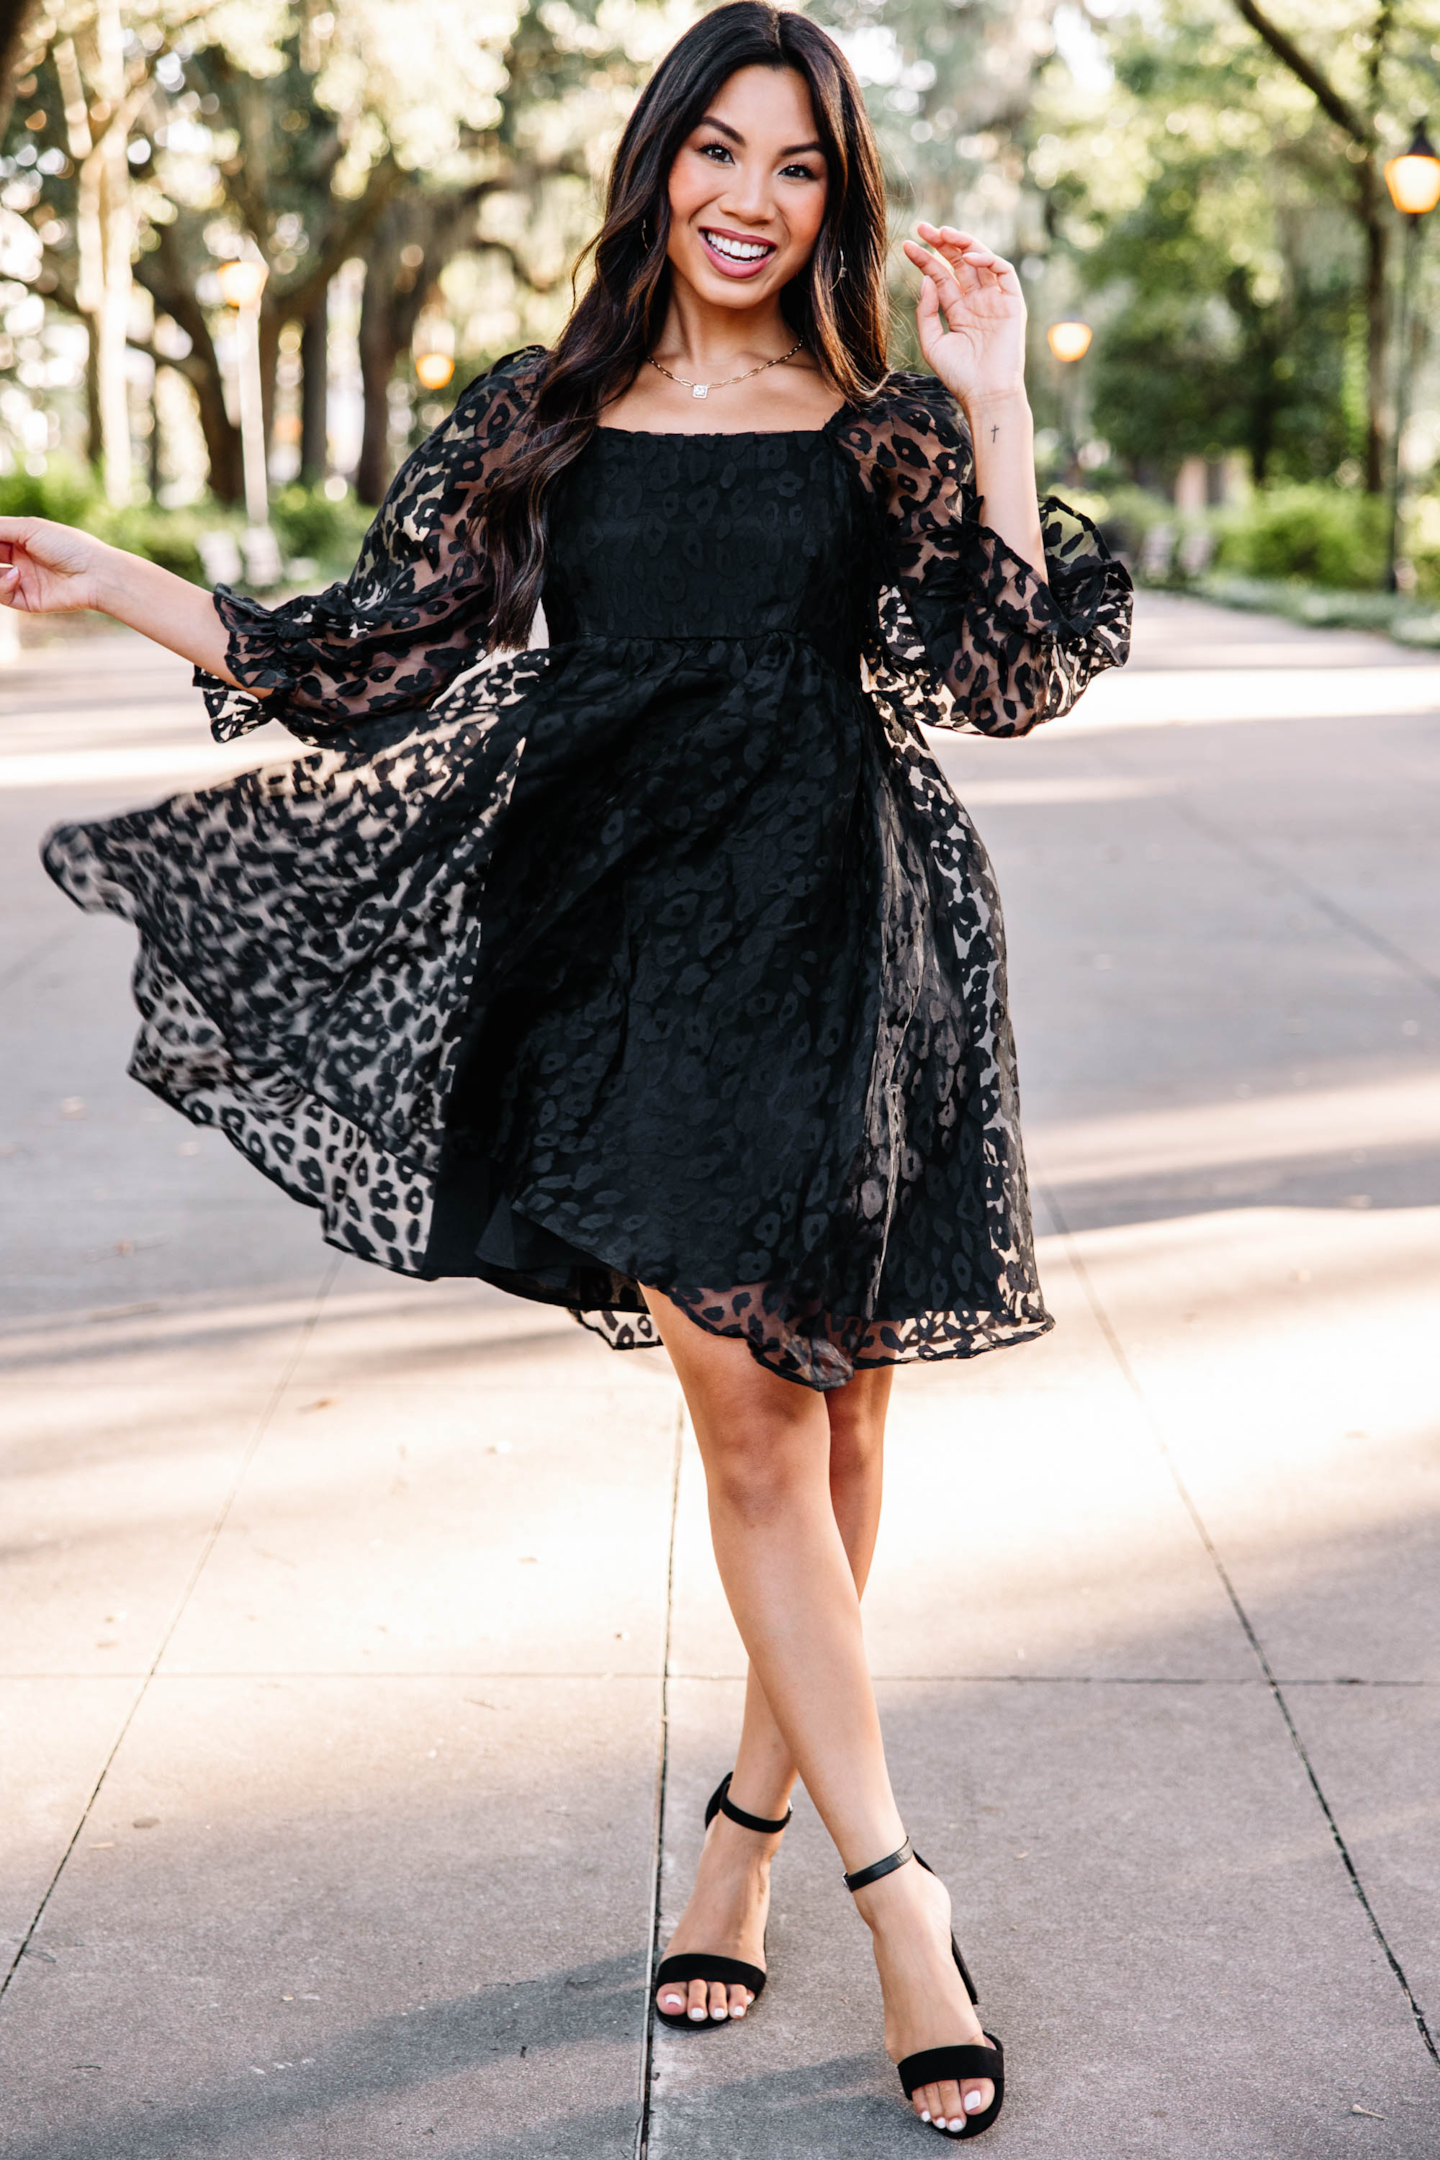 https://shopthemint.com/products/living-your-dreams-black-leopard-babydoll-dress?variant=39666261426234